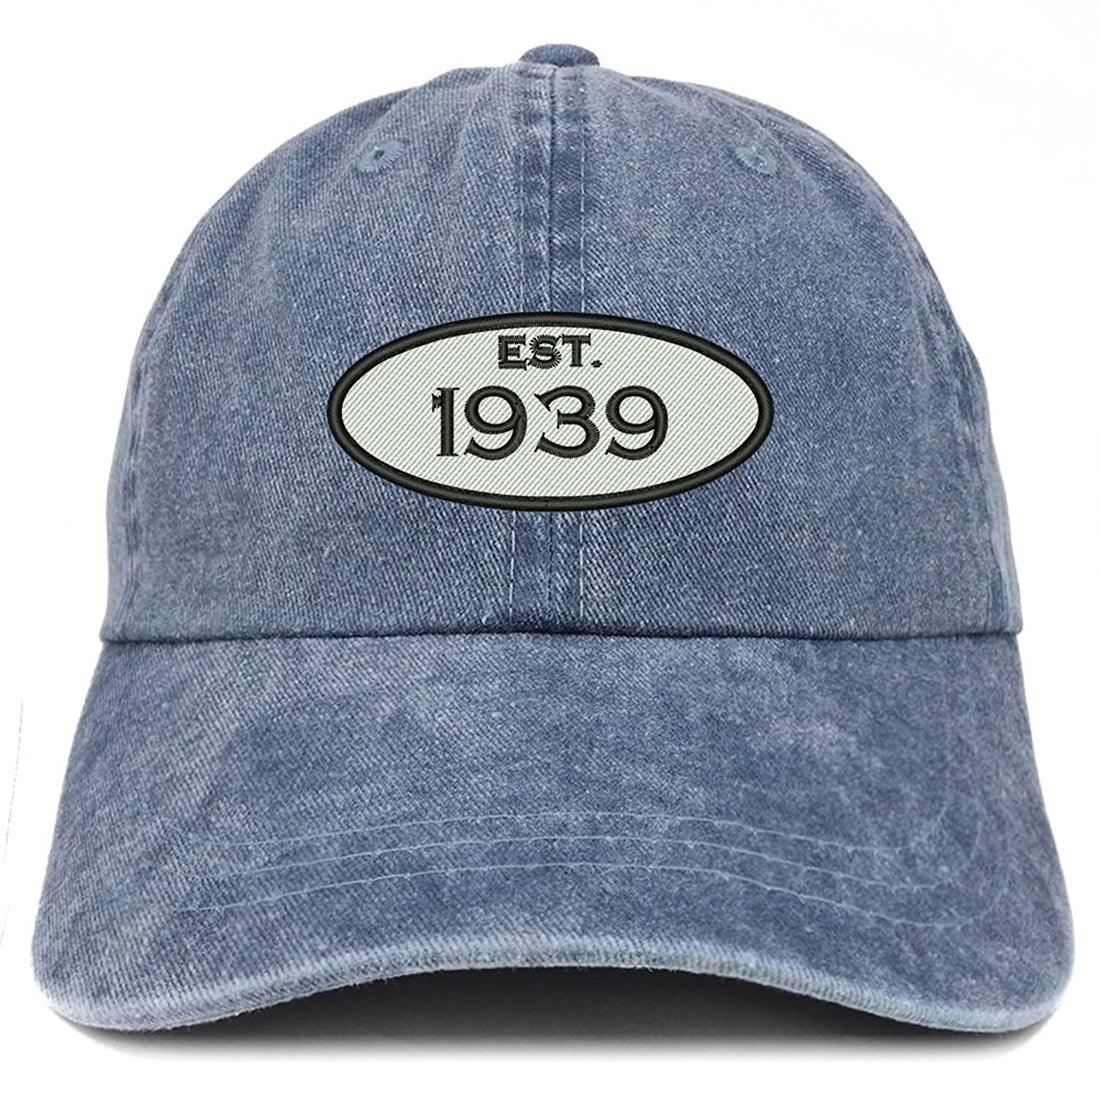 Trendy Apparel Shop Established 1939 Embroidered 80th Birthday Gift Pigment Dyed Washed Cotton Cap